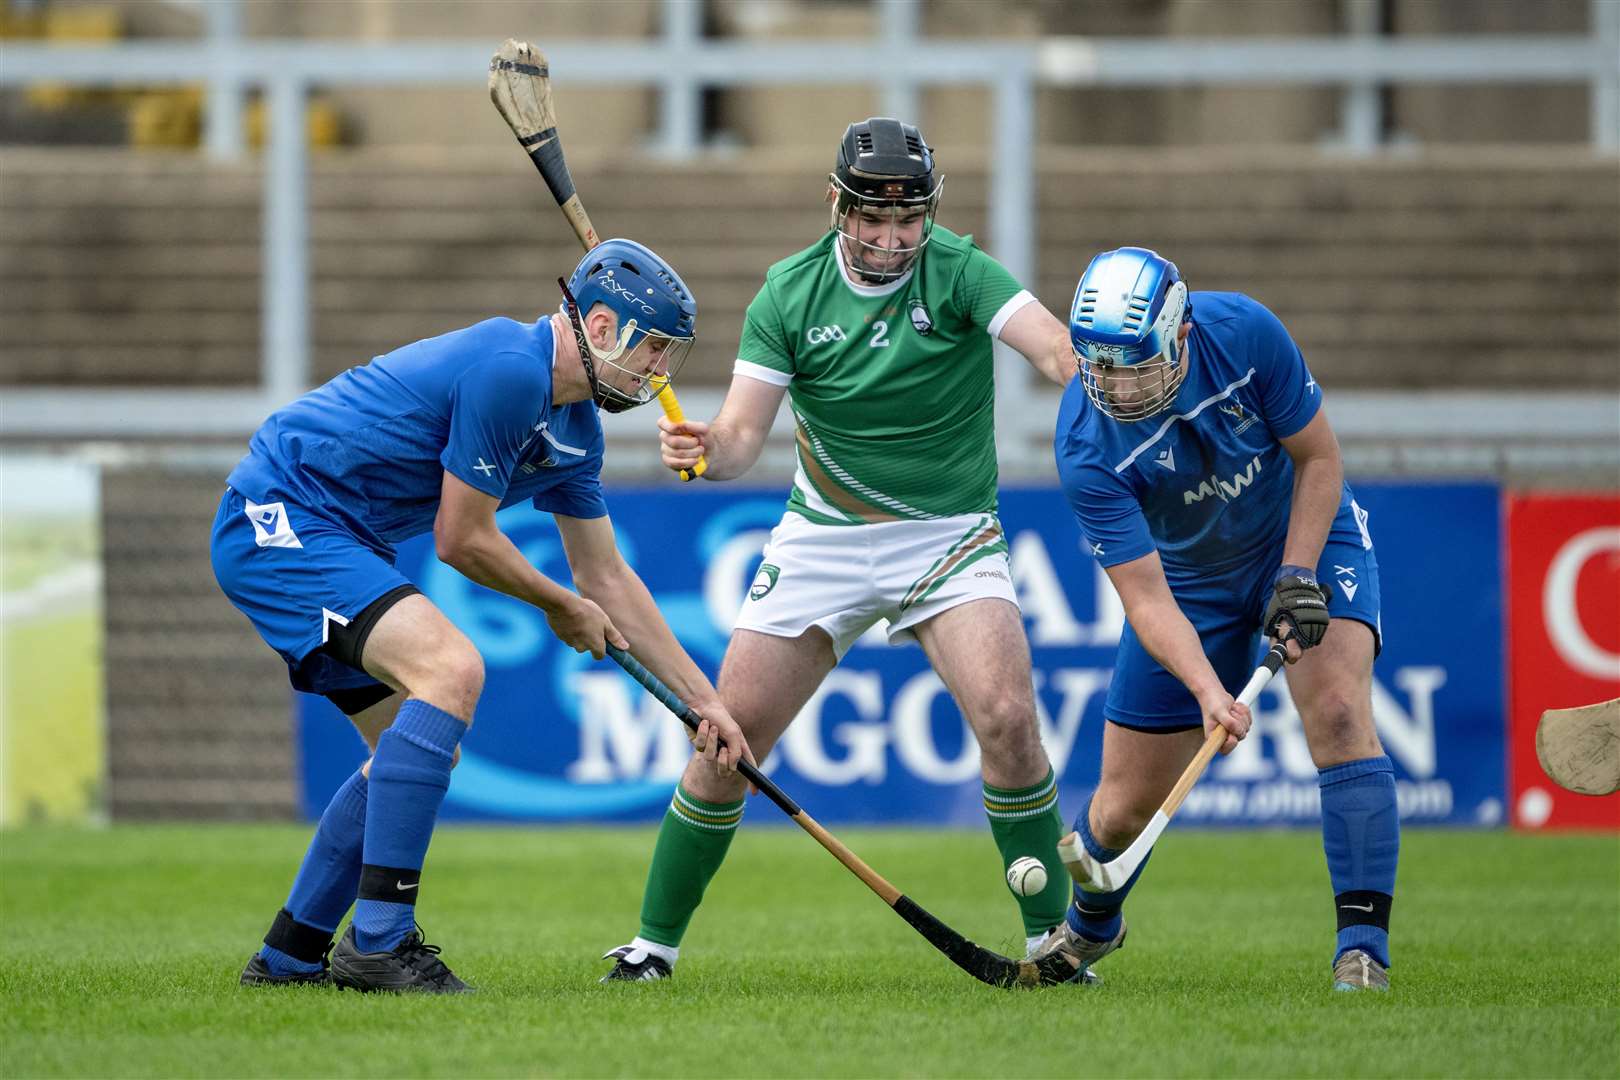 Scotland's Robert Mabon (left) and John Gillies keep the ball from Niall Arthur (Ireland) at Pairc Esler, Newry. Picture: Neil Paterson